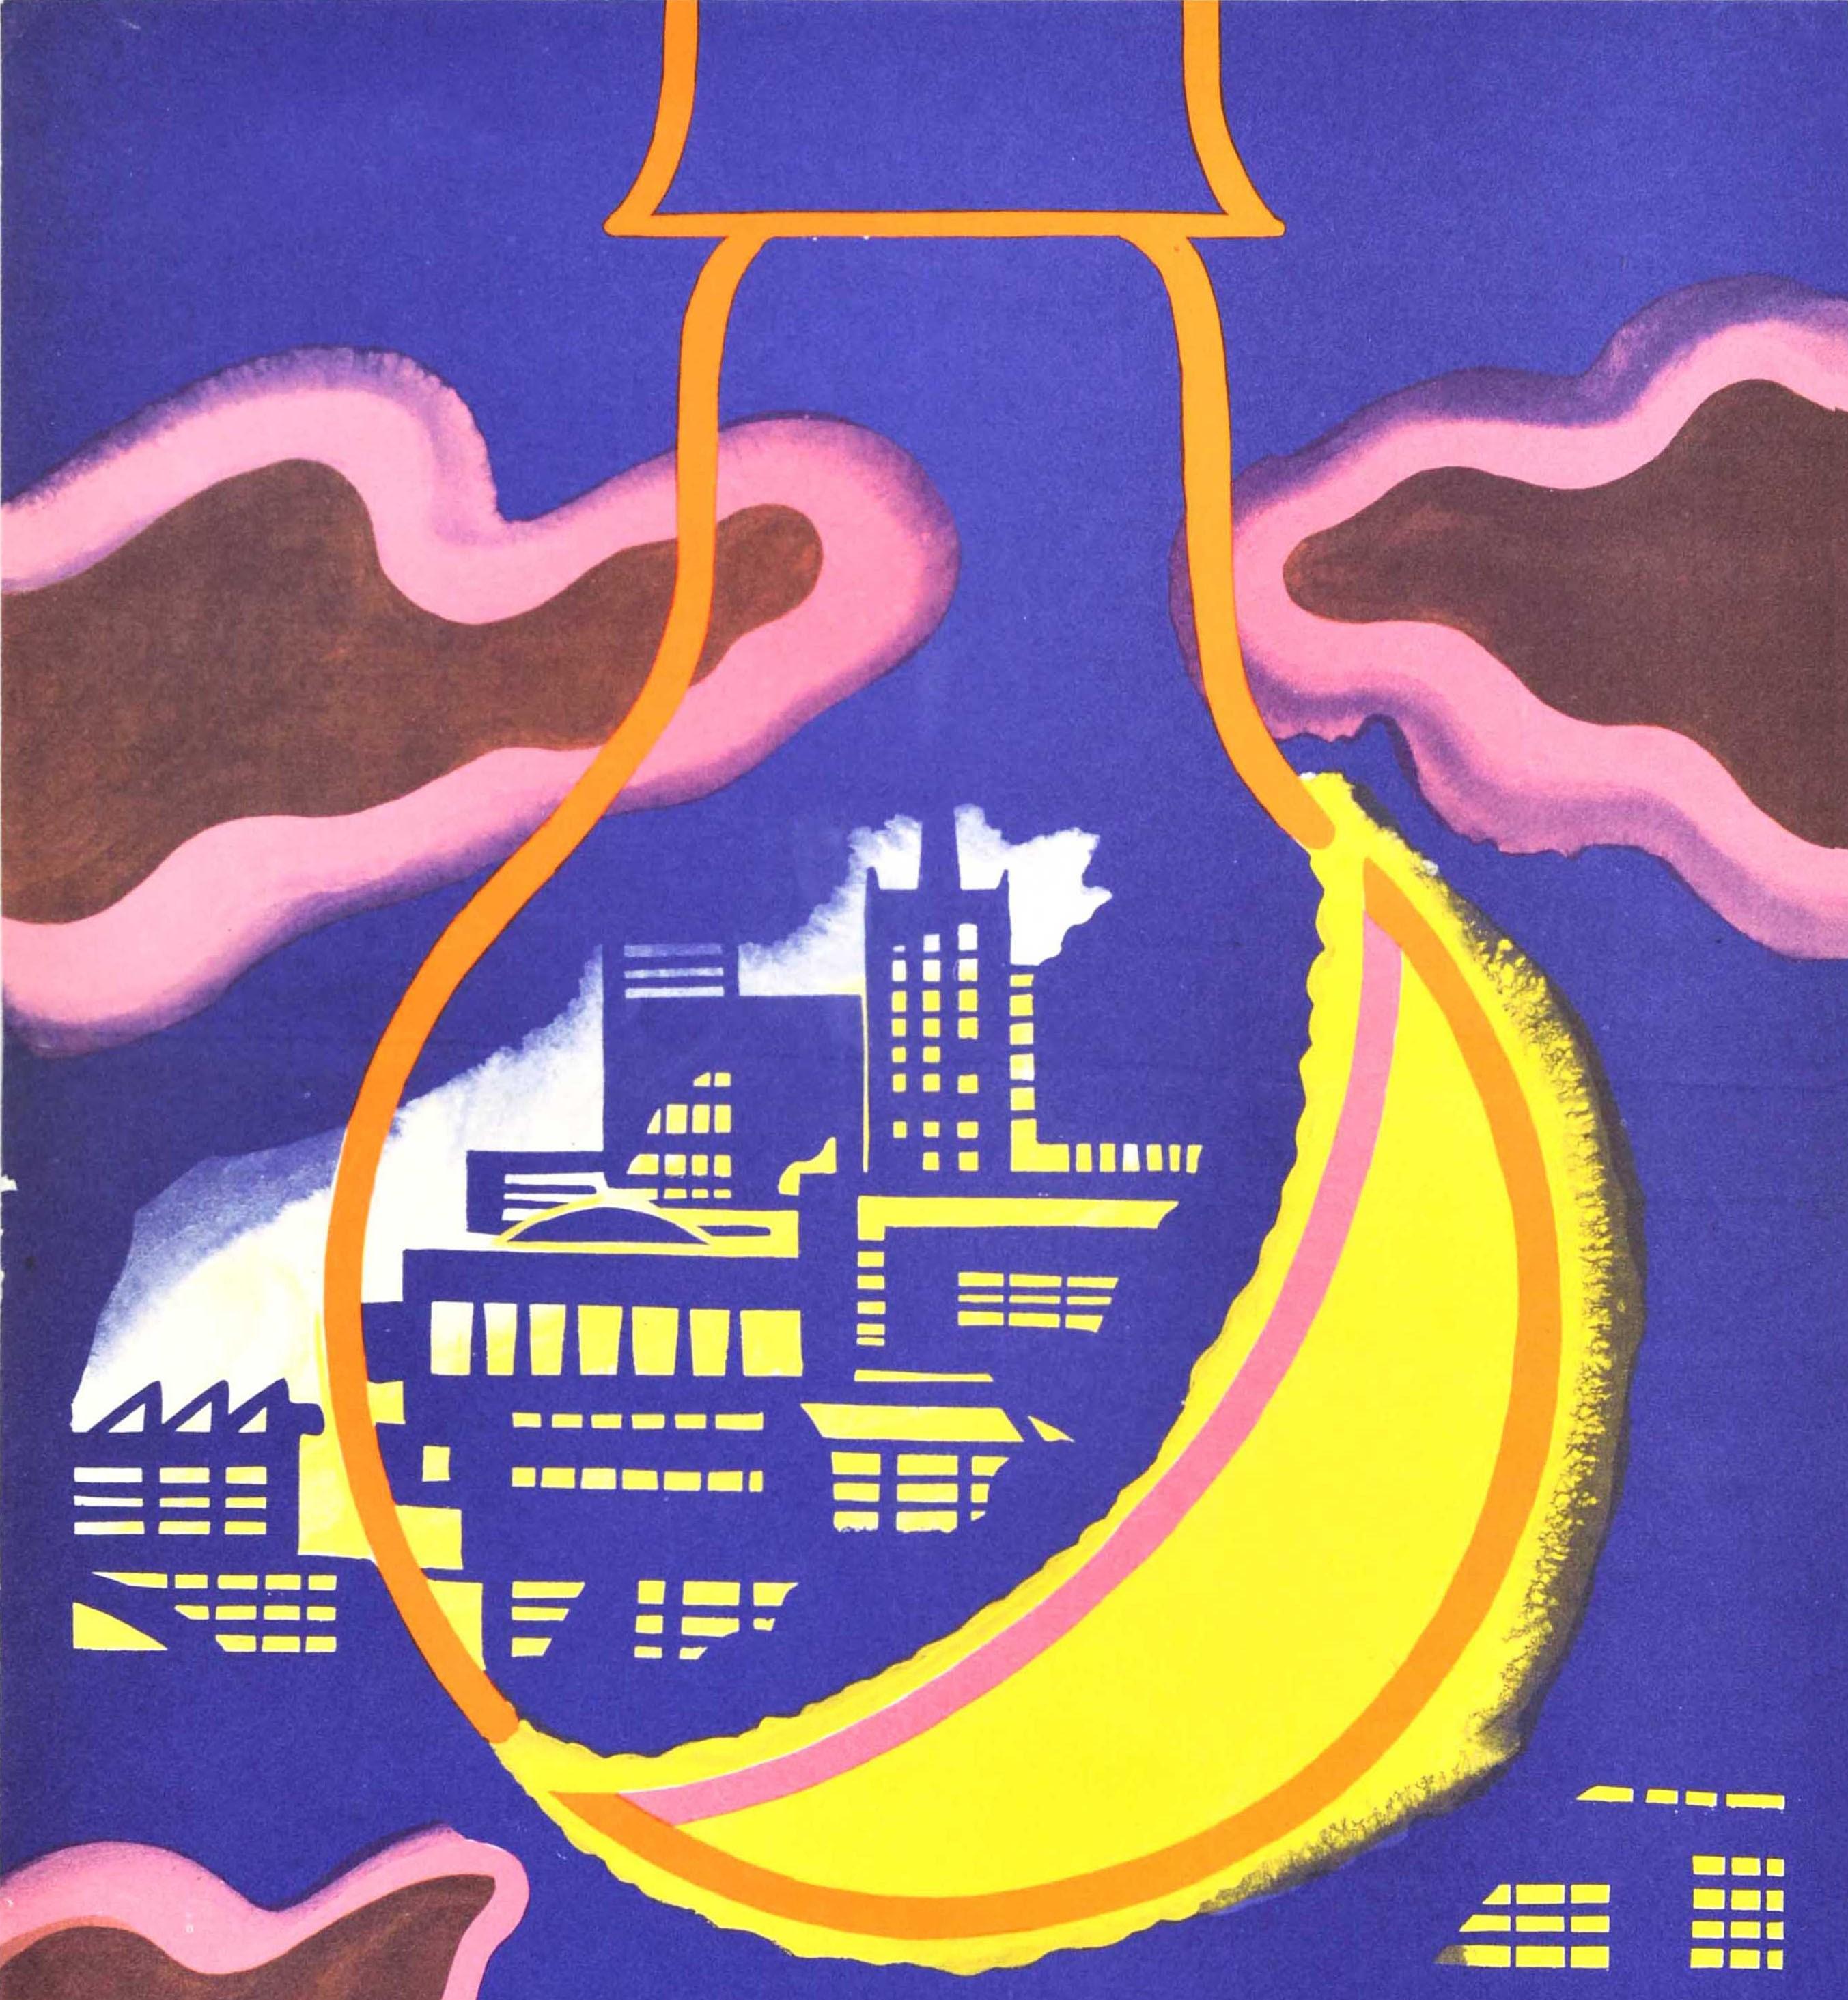 save electricity poster